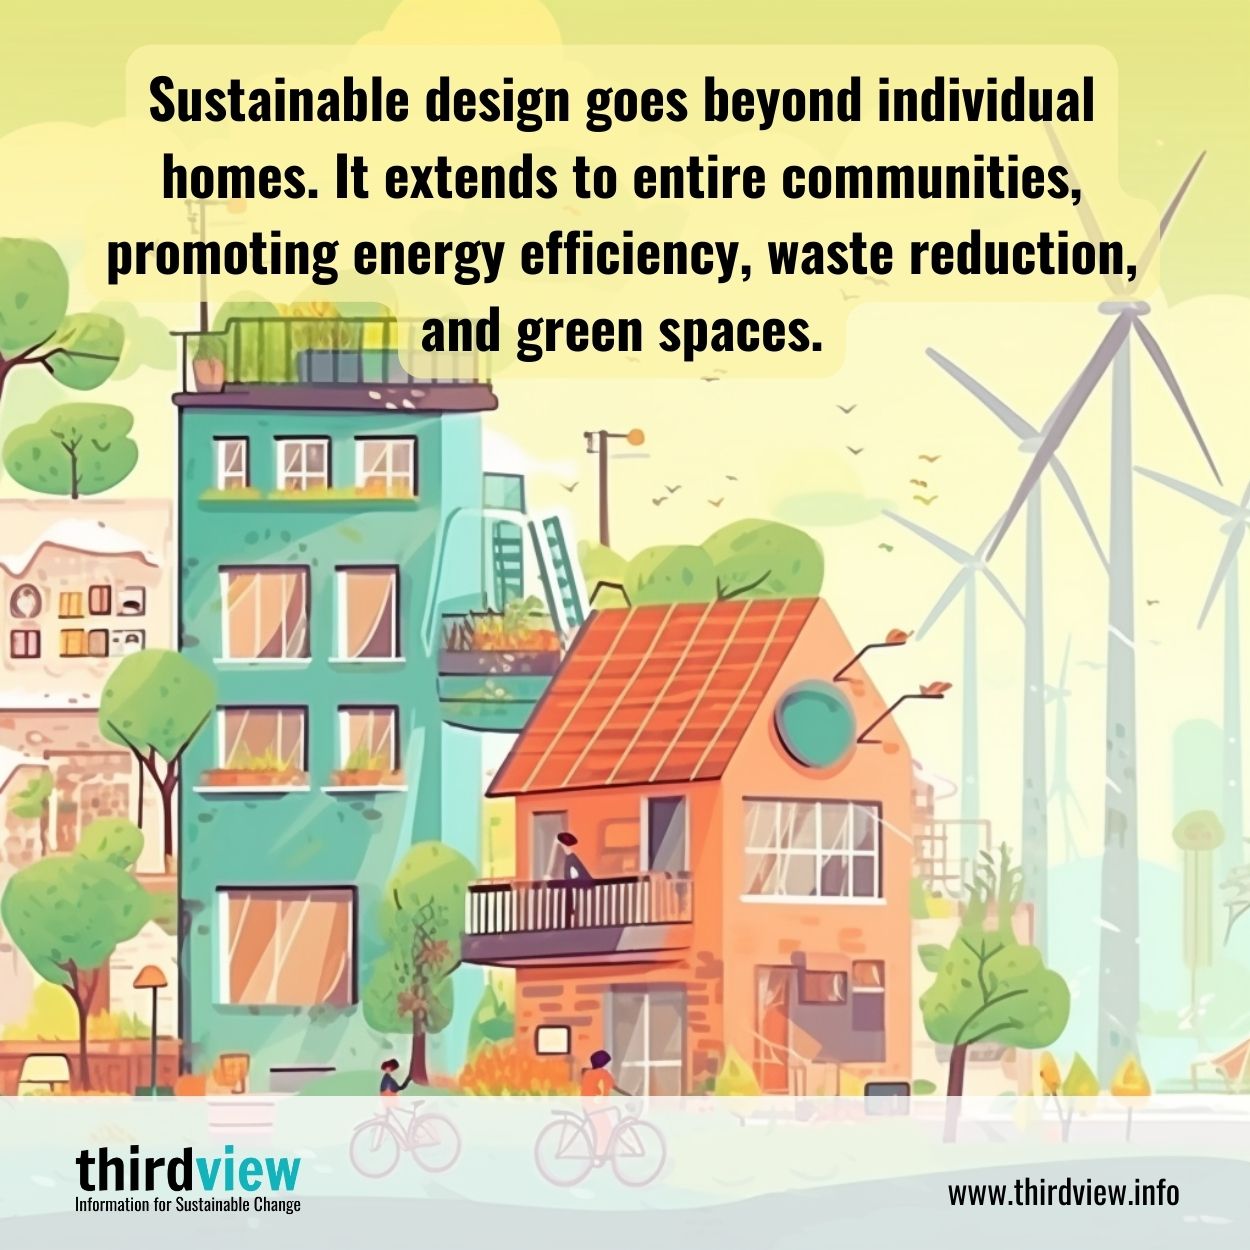 Sustainable design goes beyond individual homes. It extends to entire communities, promoting energy efficiency, waste reduction, and green spaces